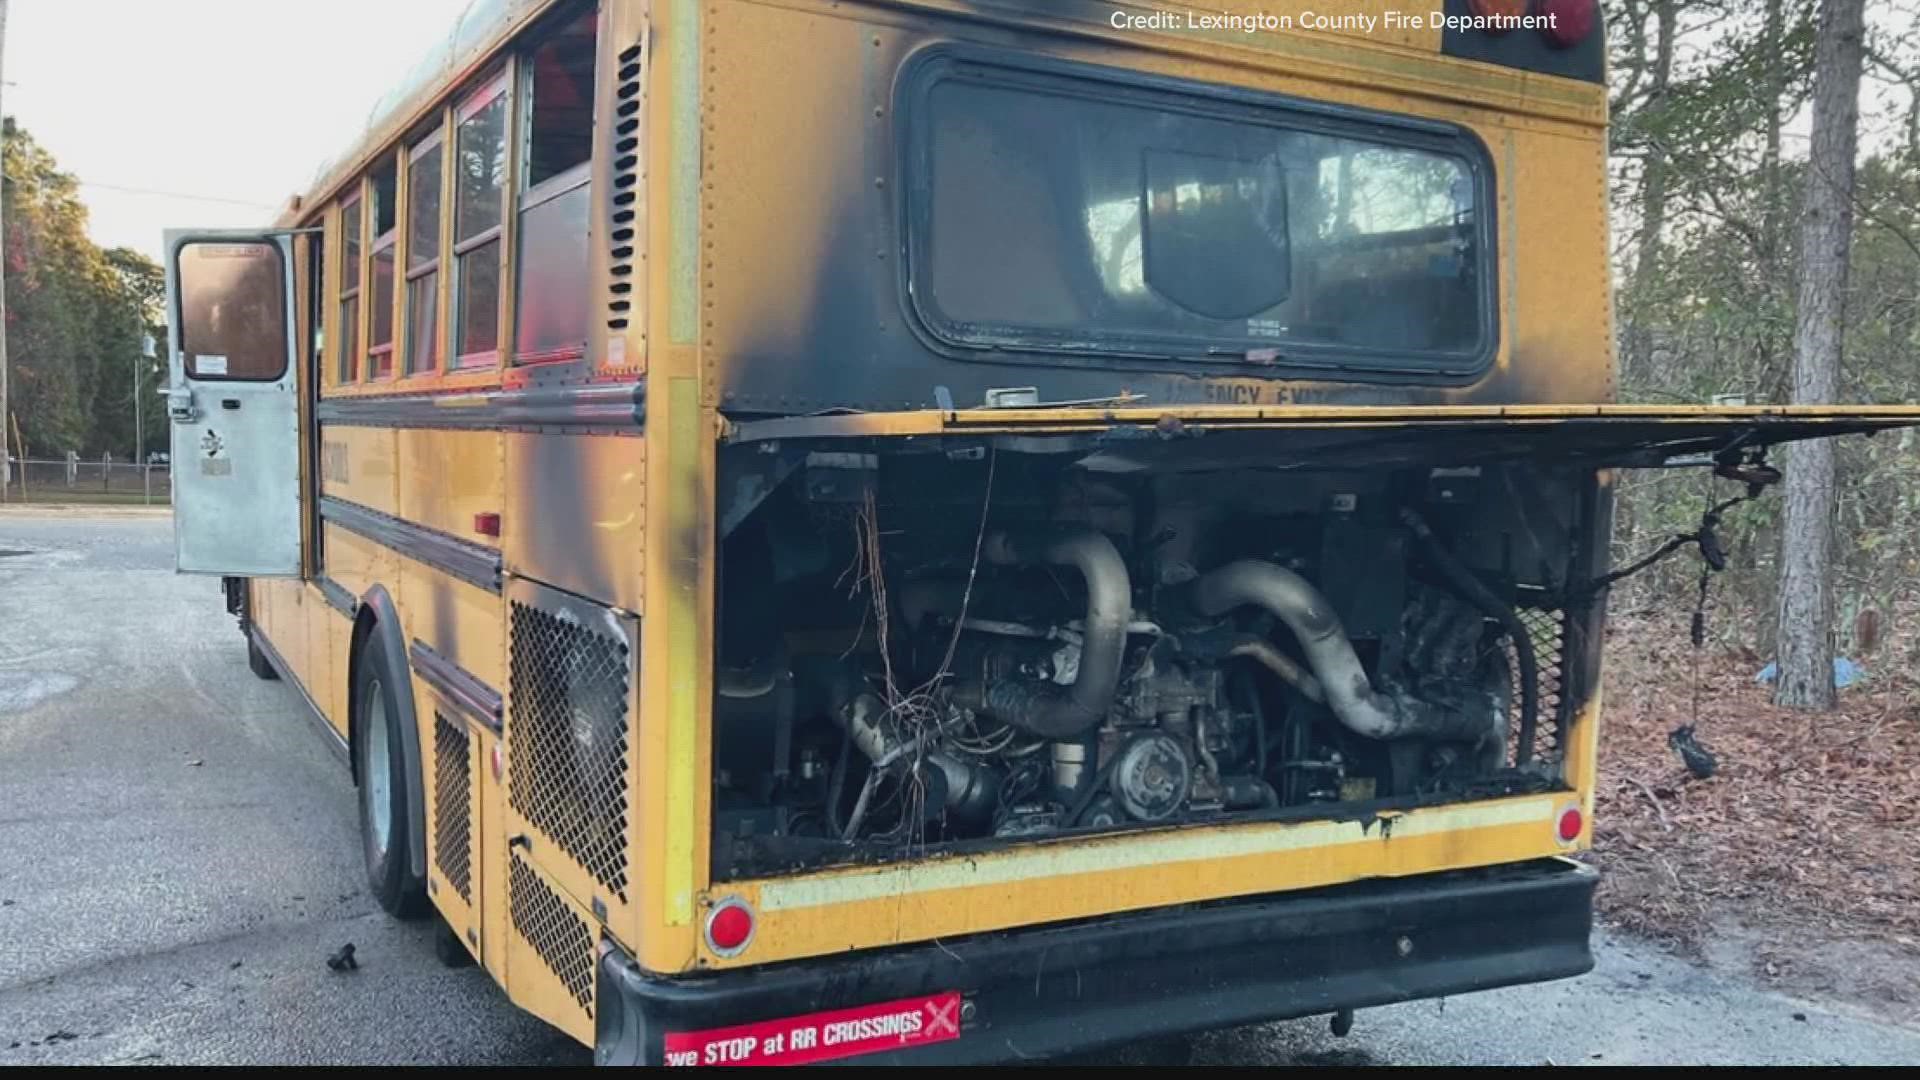 Engine compartment sparks fire at rear of school bus in Gaston, South Carolina